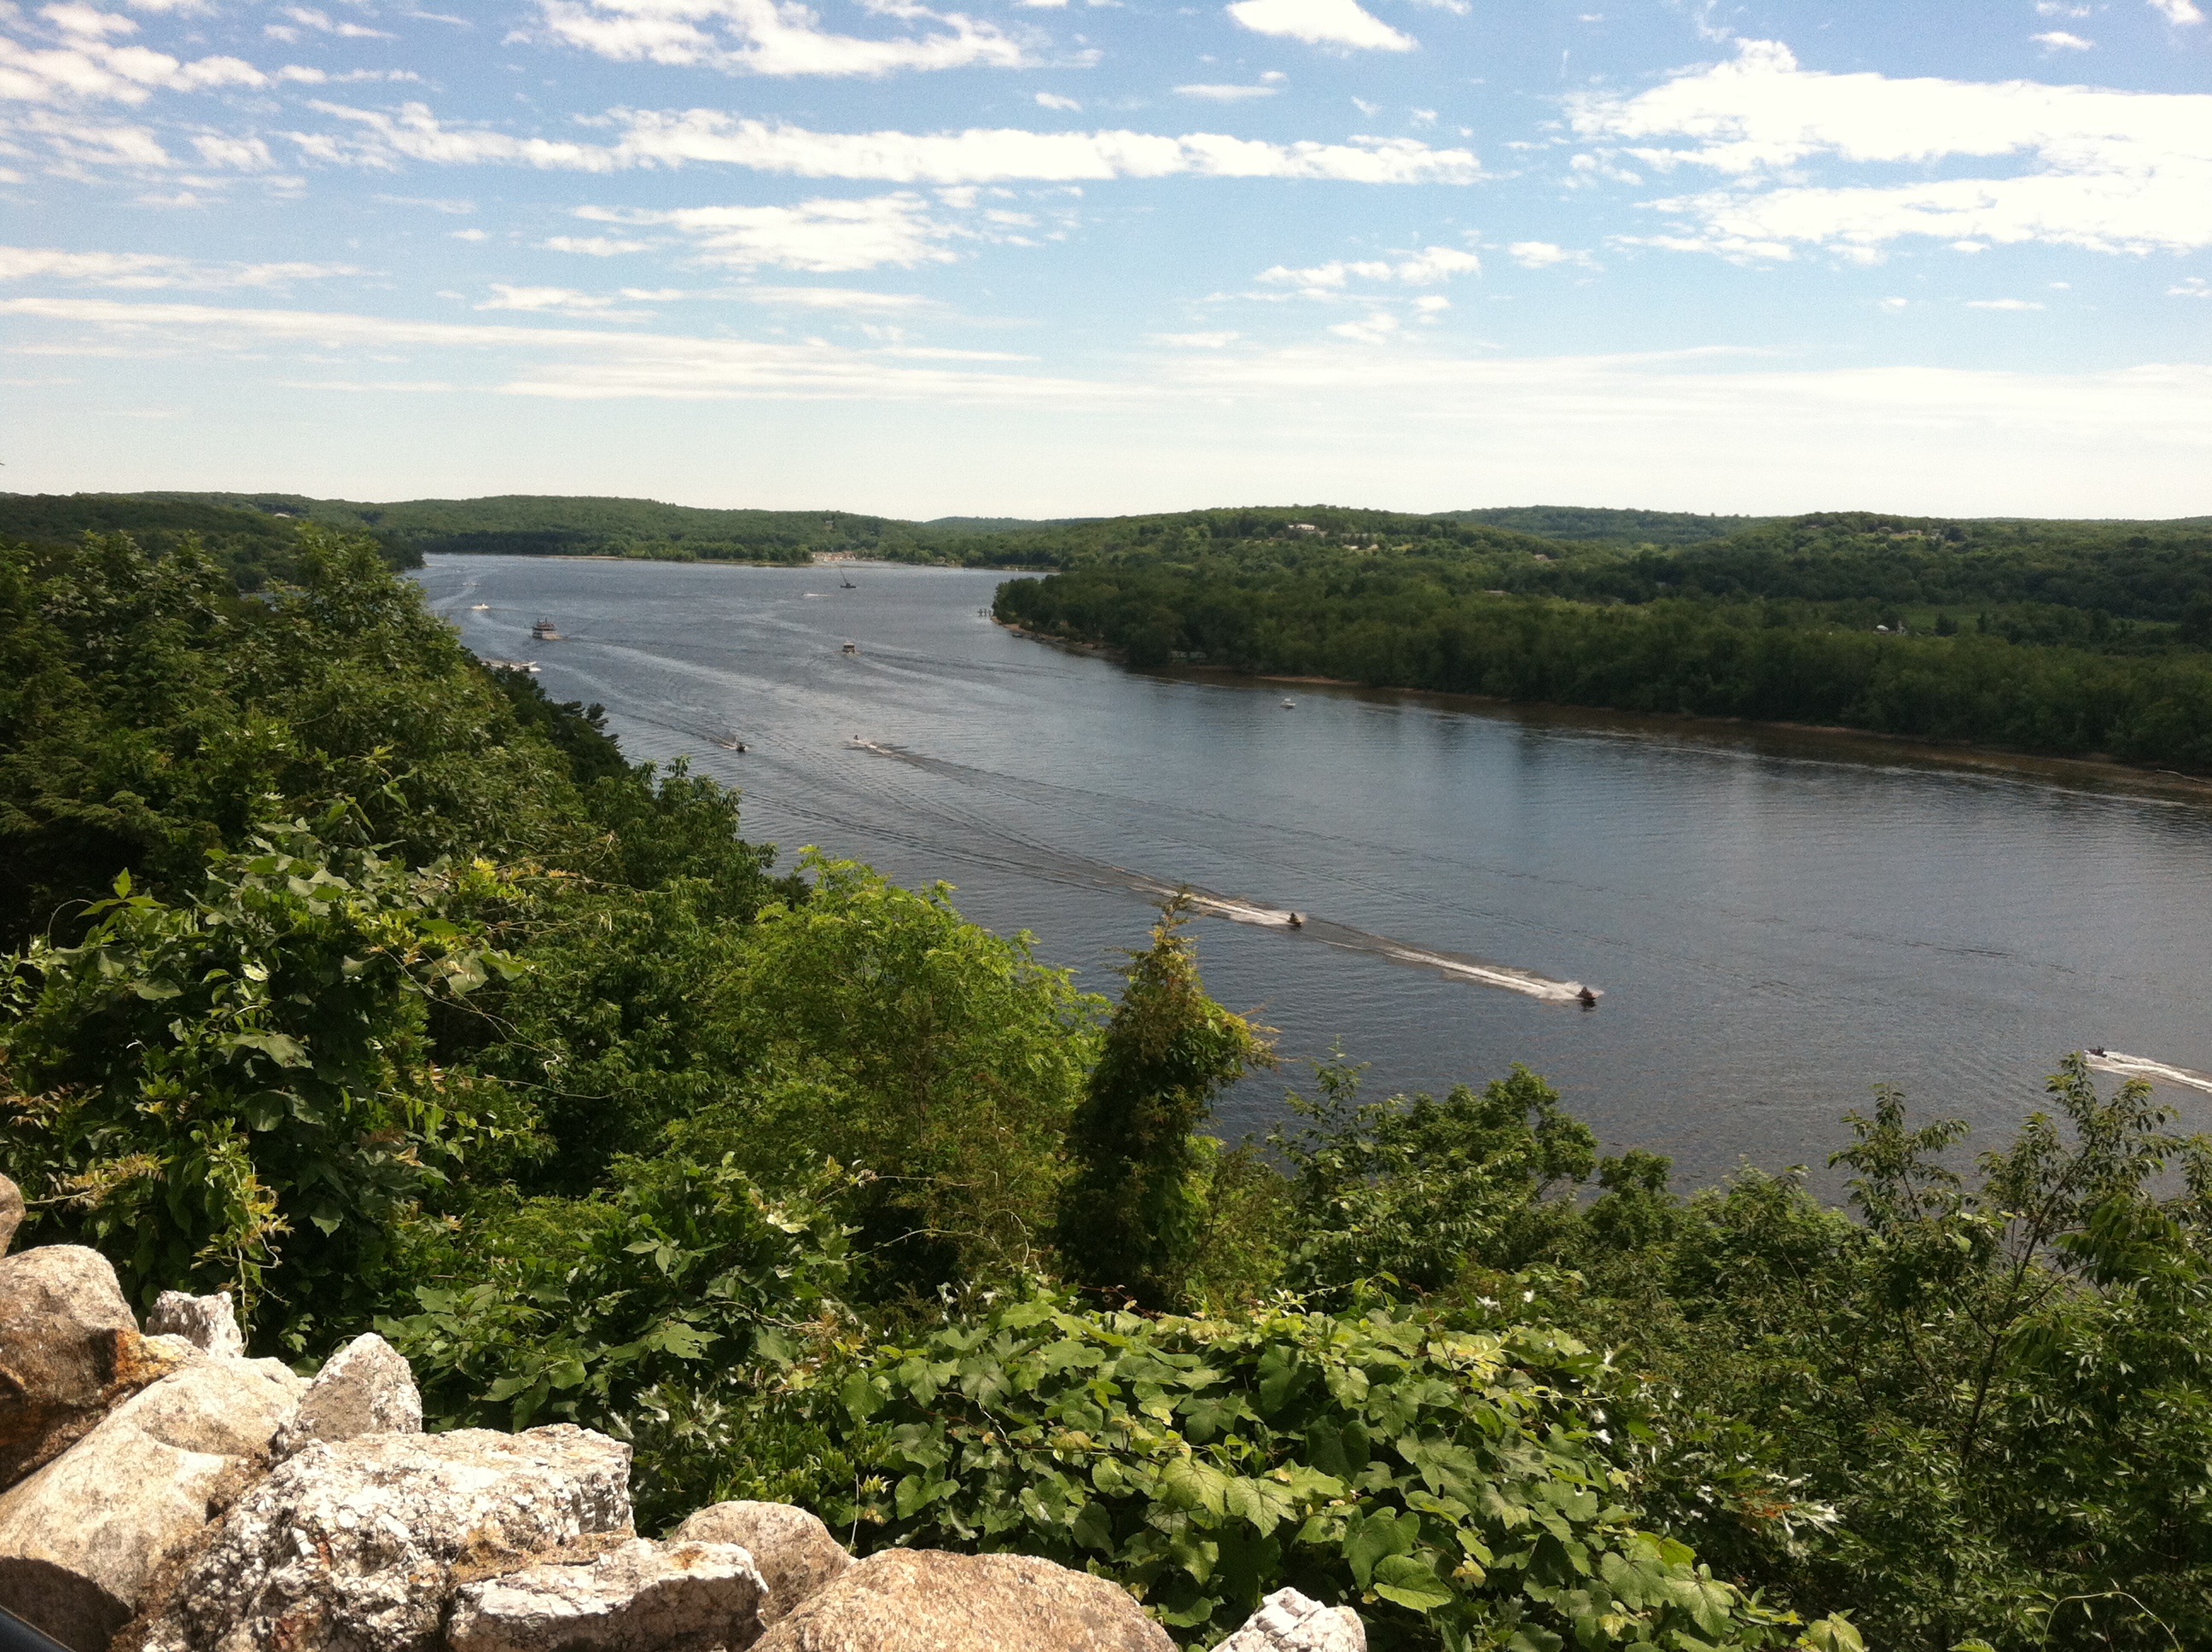 View from Gillette Castle, Haddam, CT